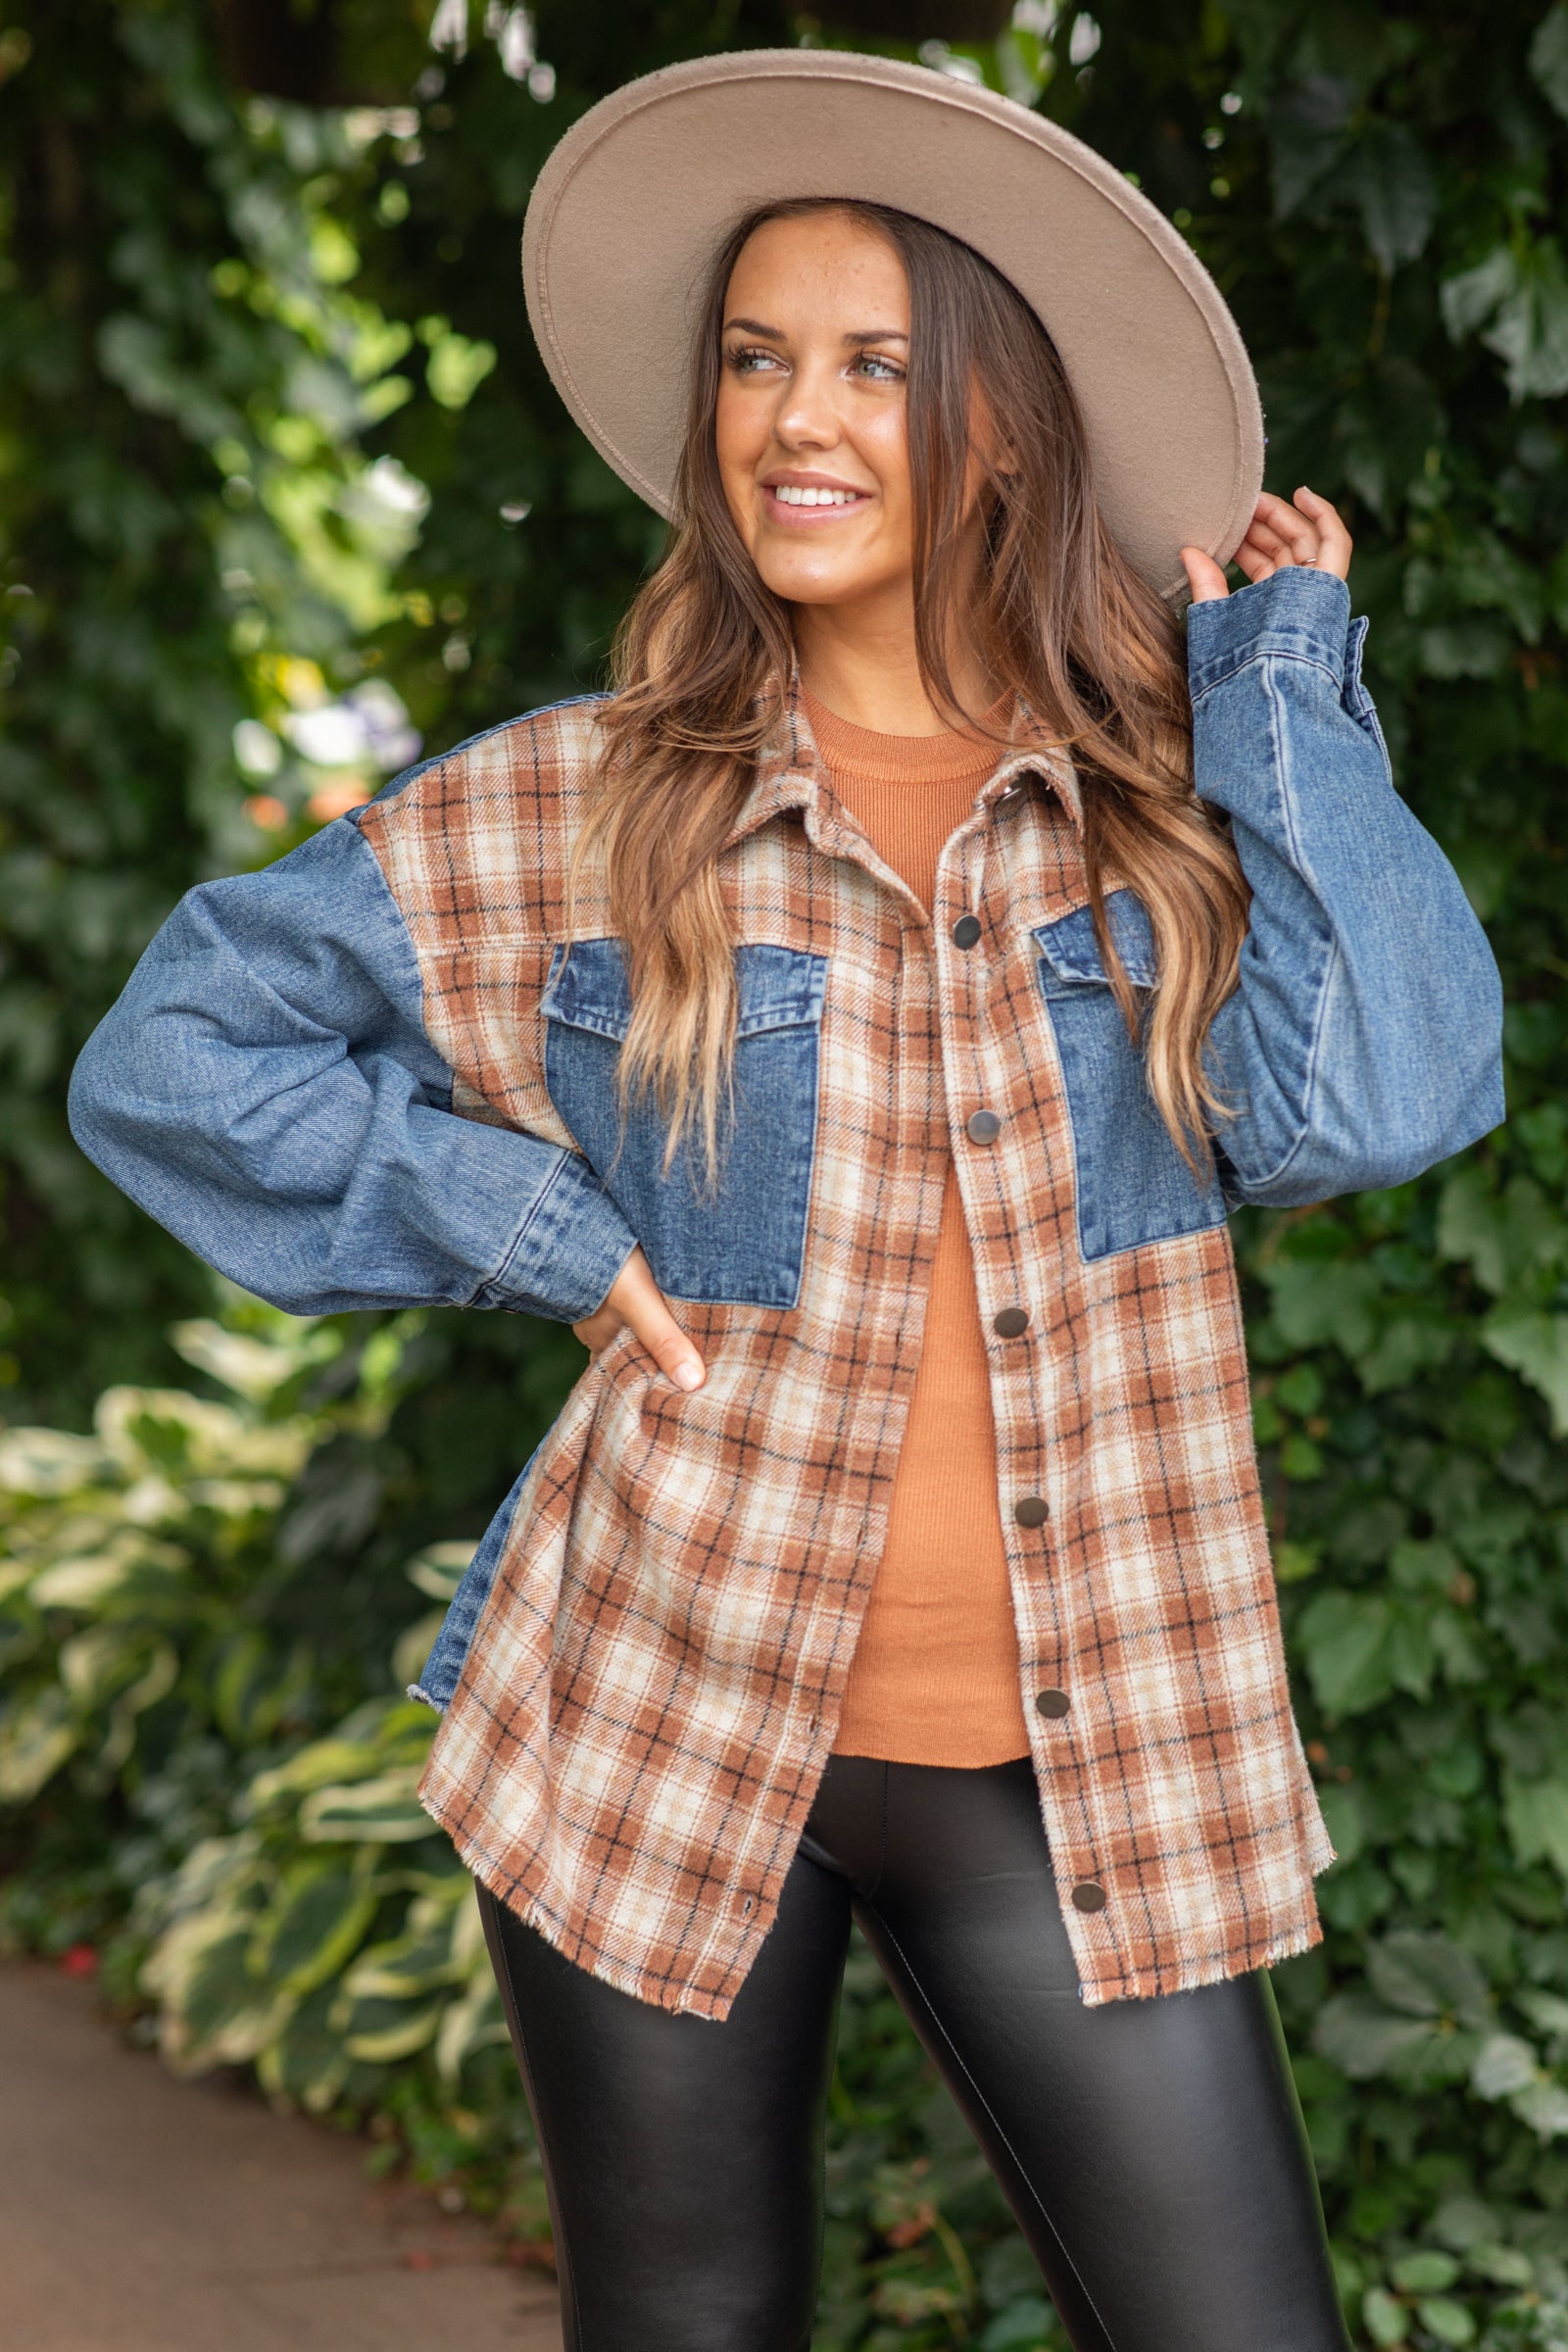 Camel and Beige Plaid Jacket With Denim